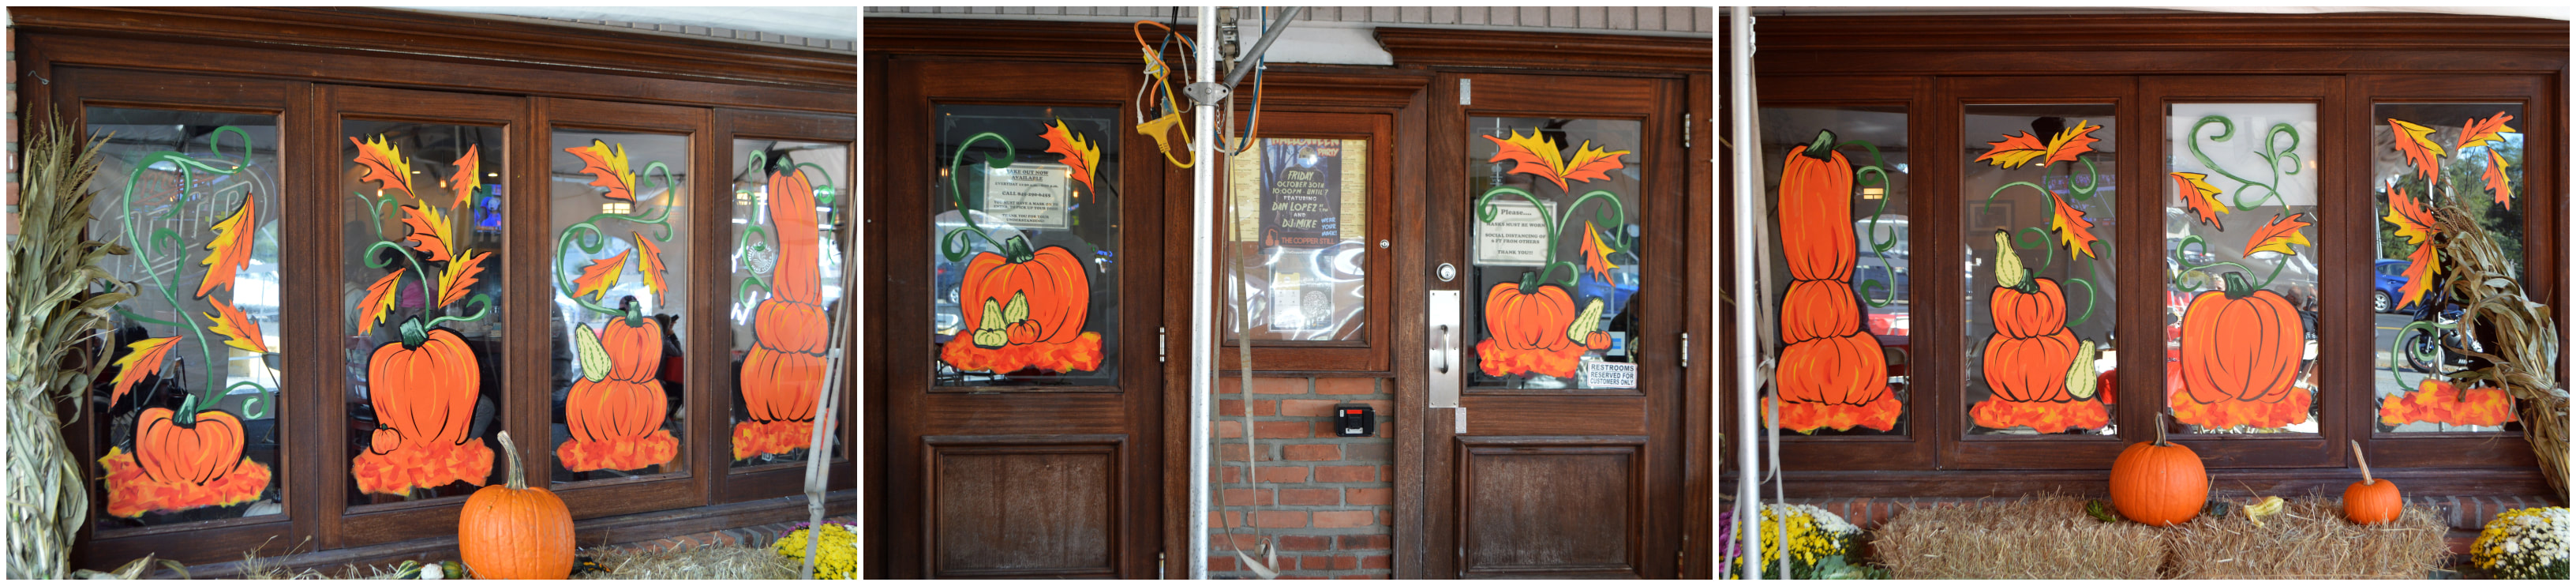 Fall Window Painting at The Copper Still Restaurant & Bar in Pomona, Rockland County, NY